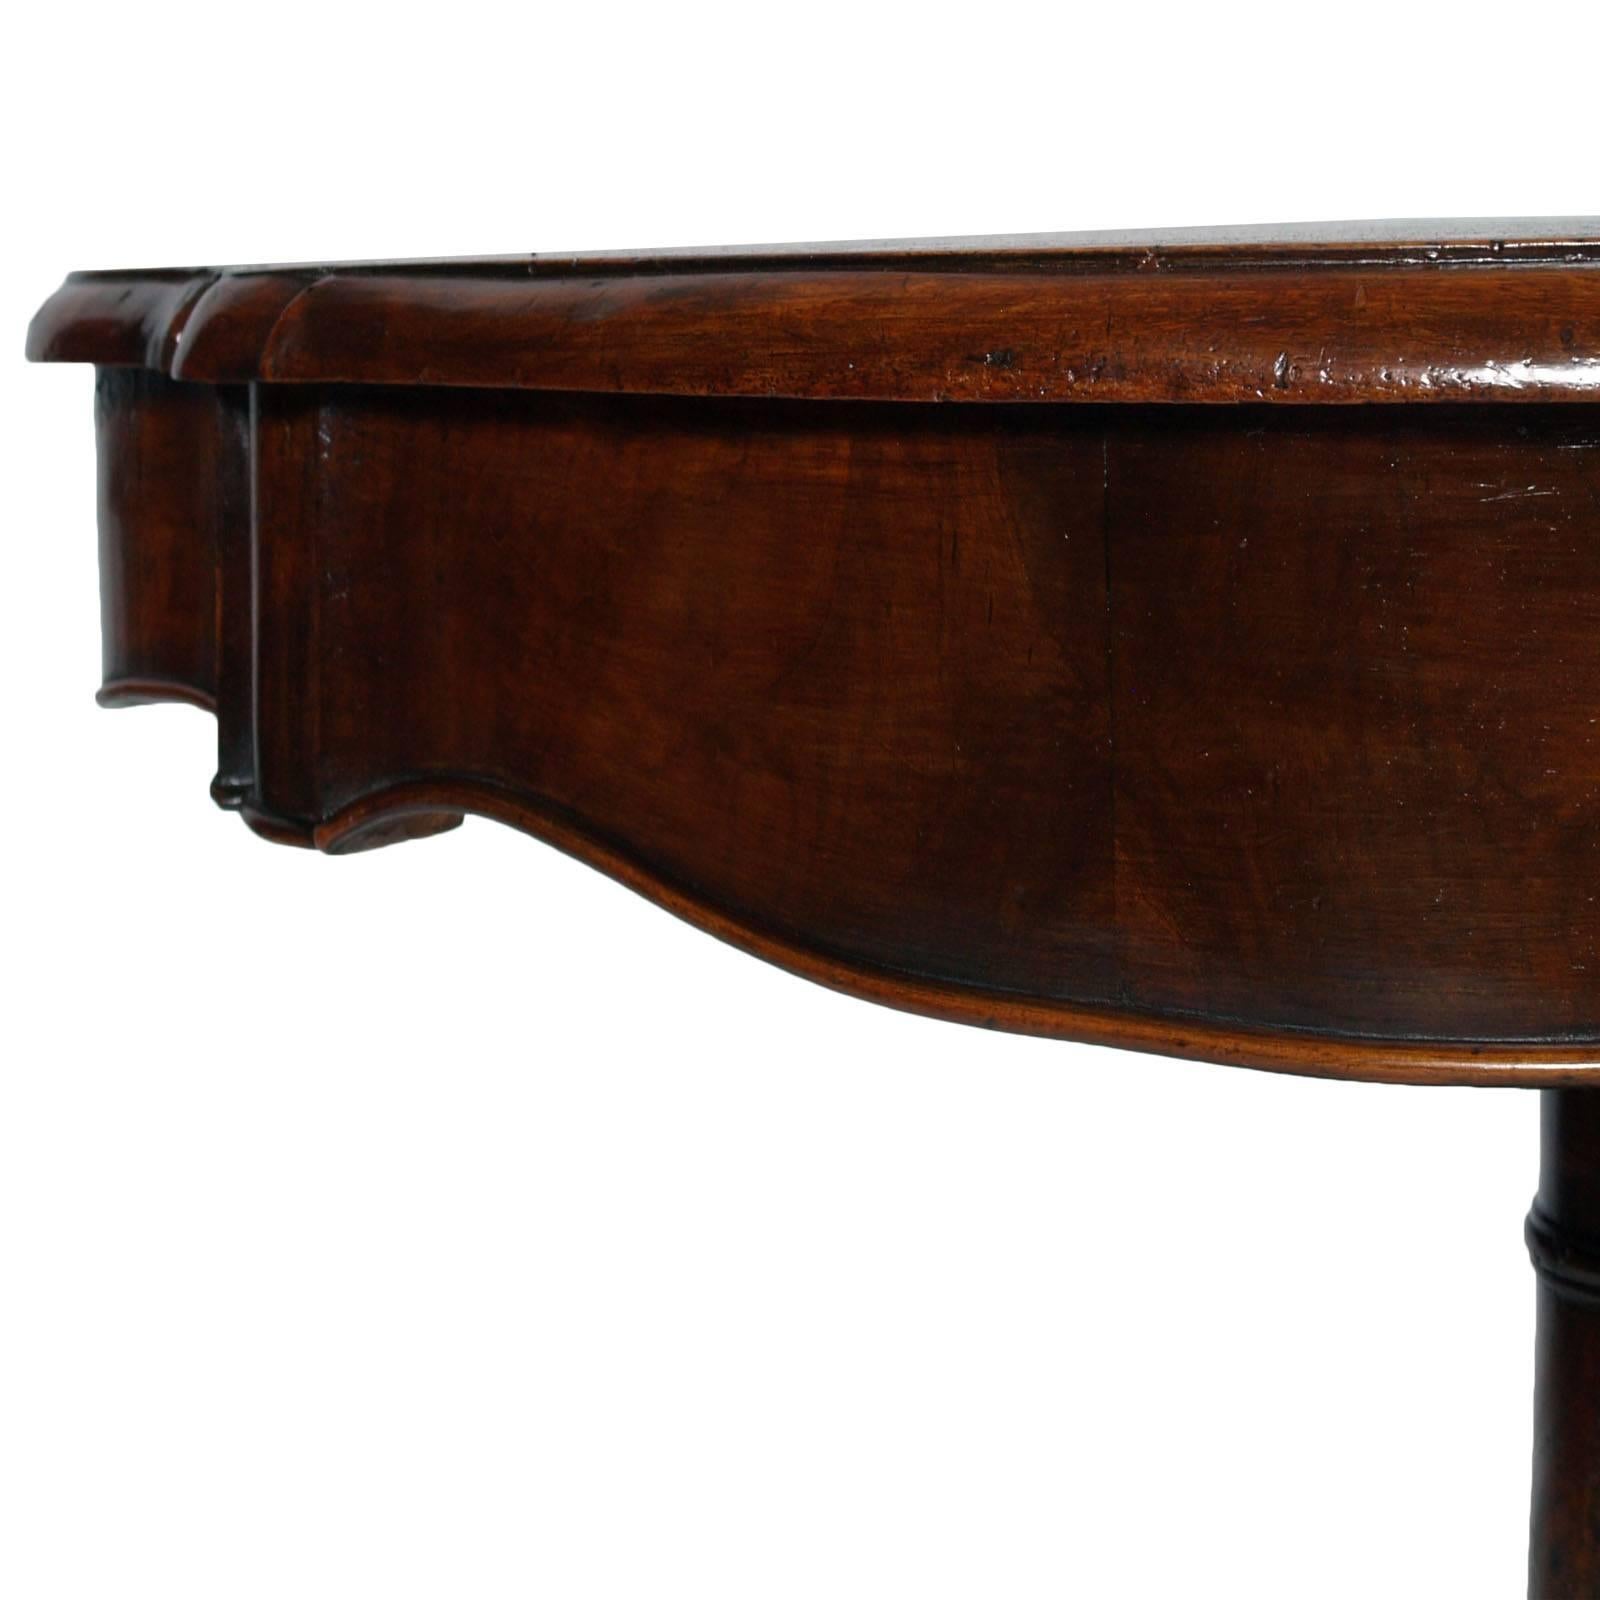 Mid 18th Century Baroque Table , Carvet Walnut by Cucchi & Sola finished to wax In Excellent Condition For Sale In Vigonza, Padua